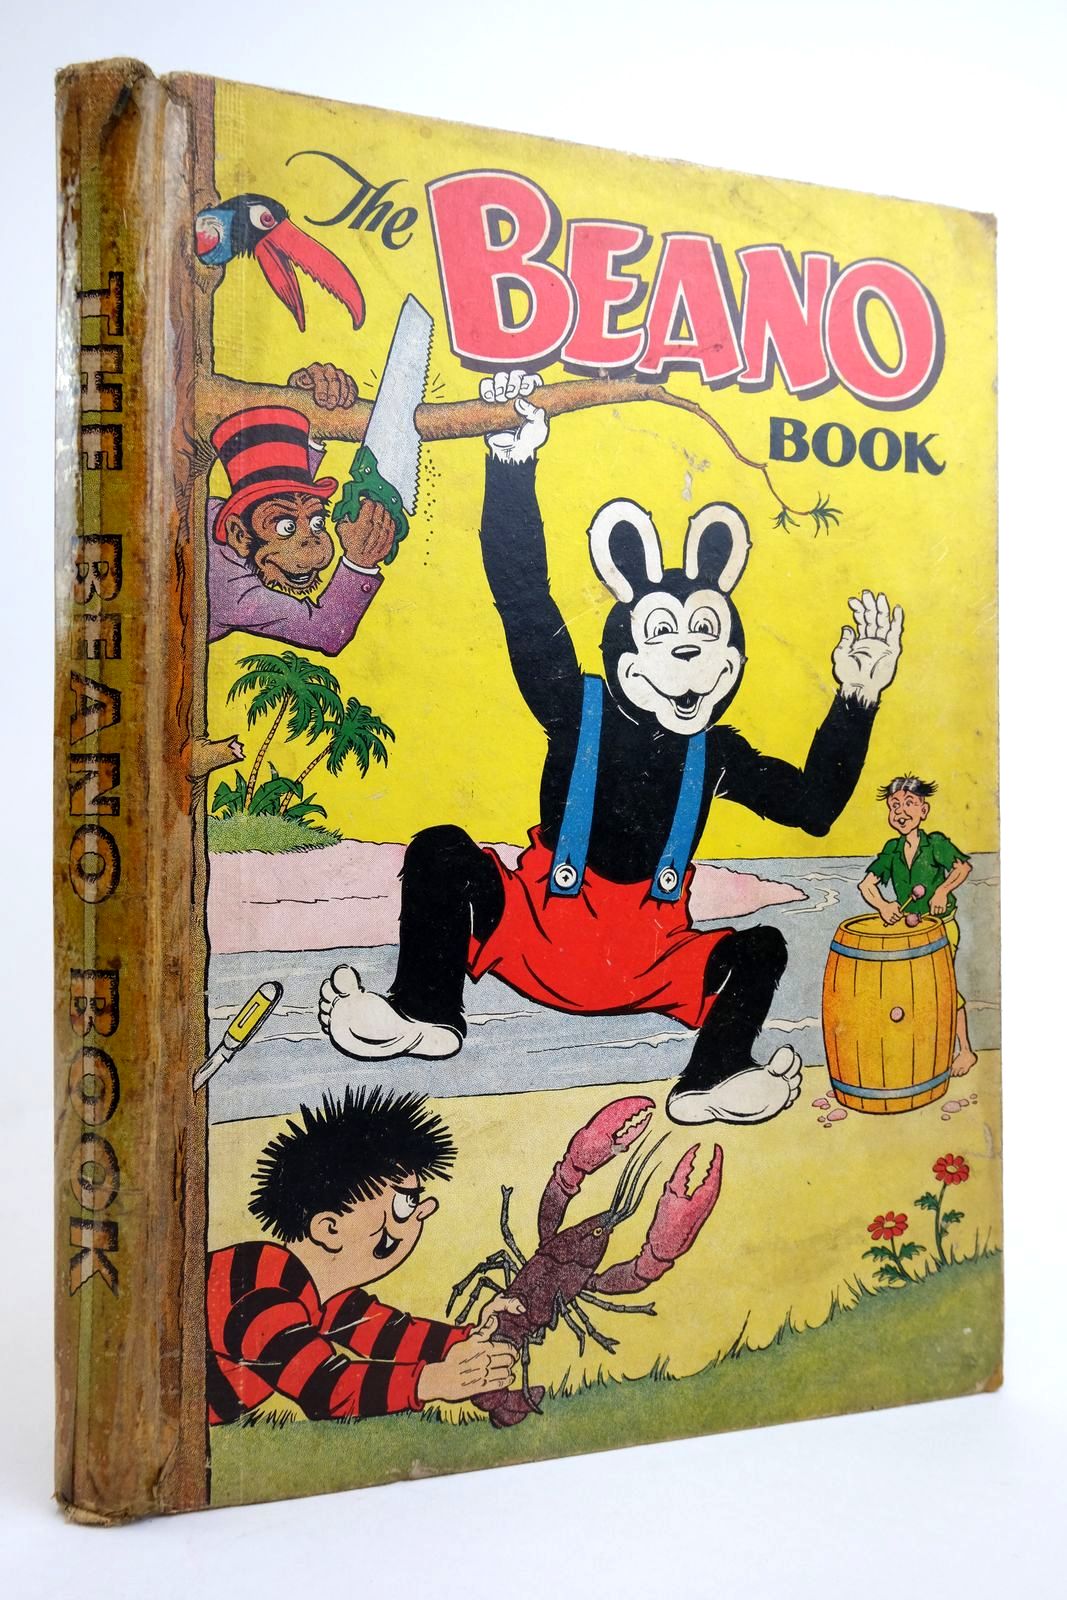 Photo of THE BEANO BOOK 1954- Stock Number: 2135521